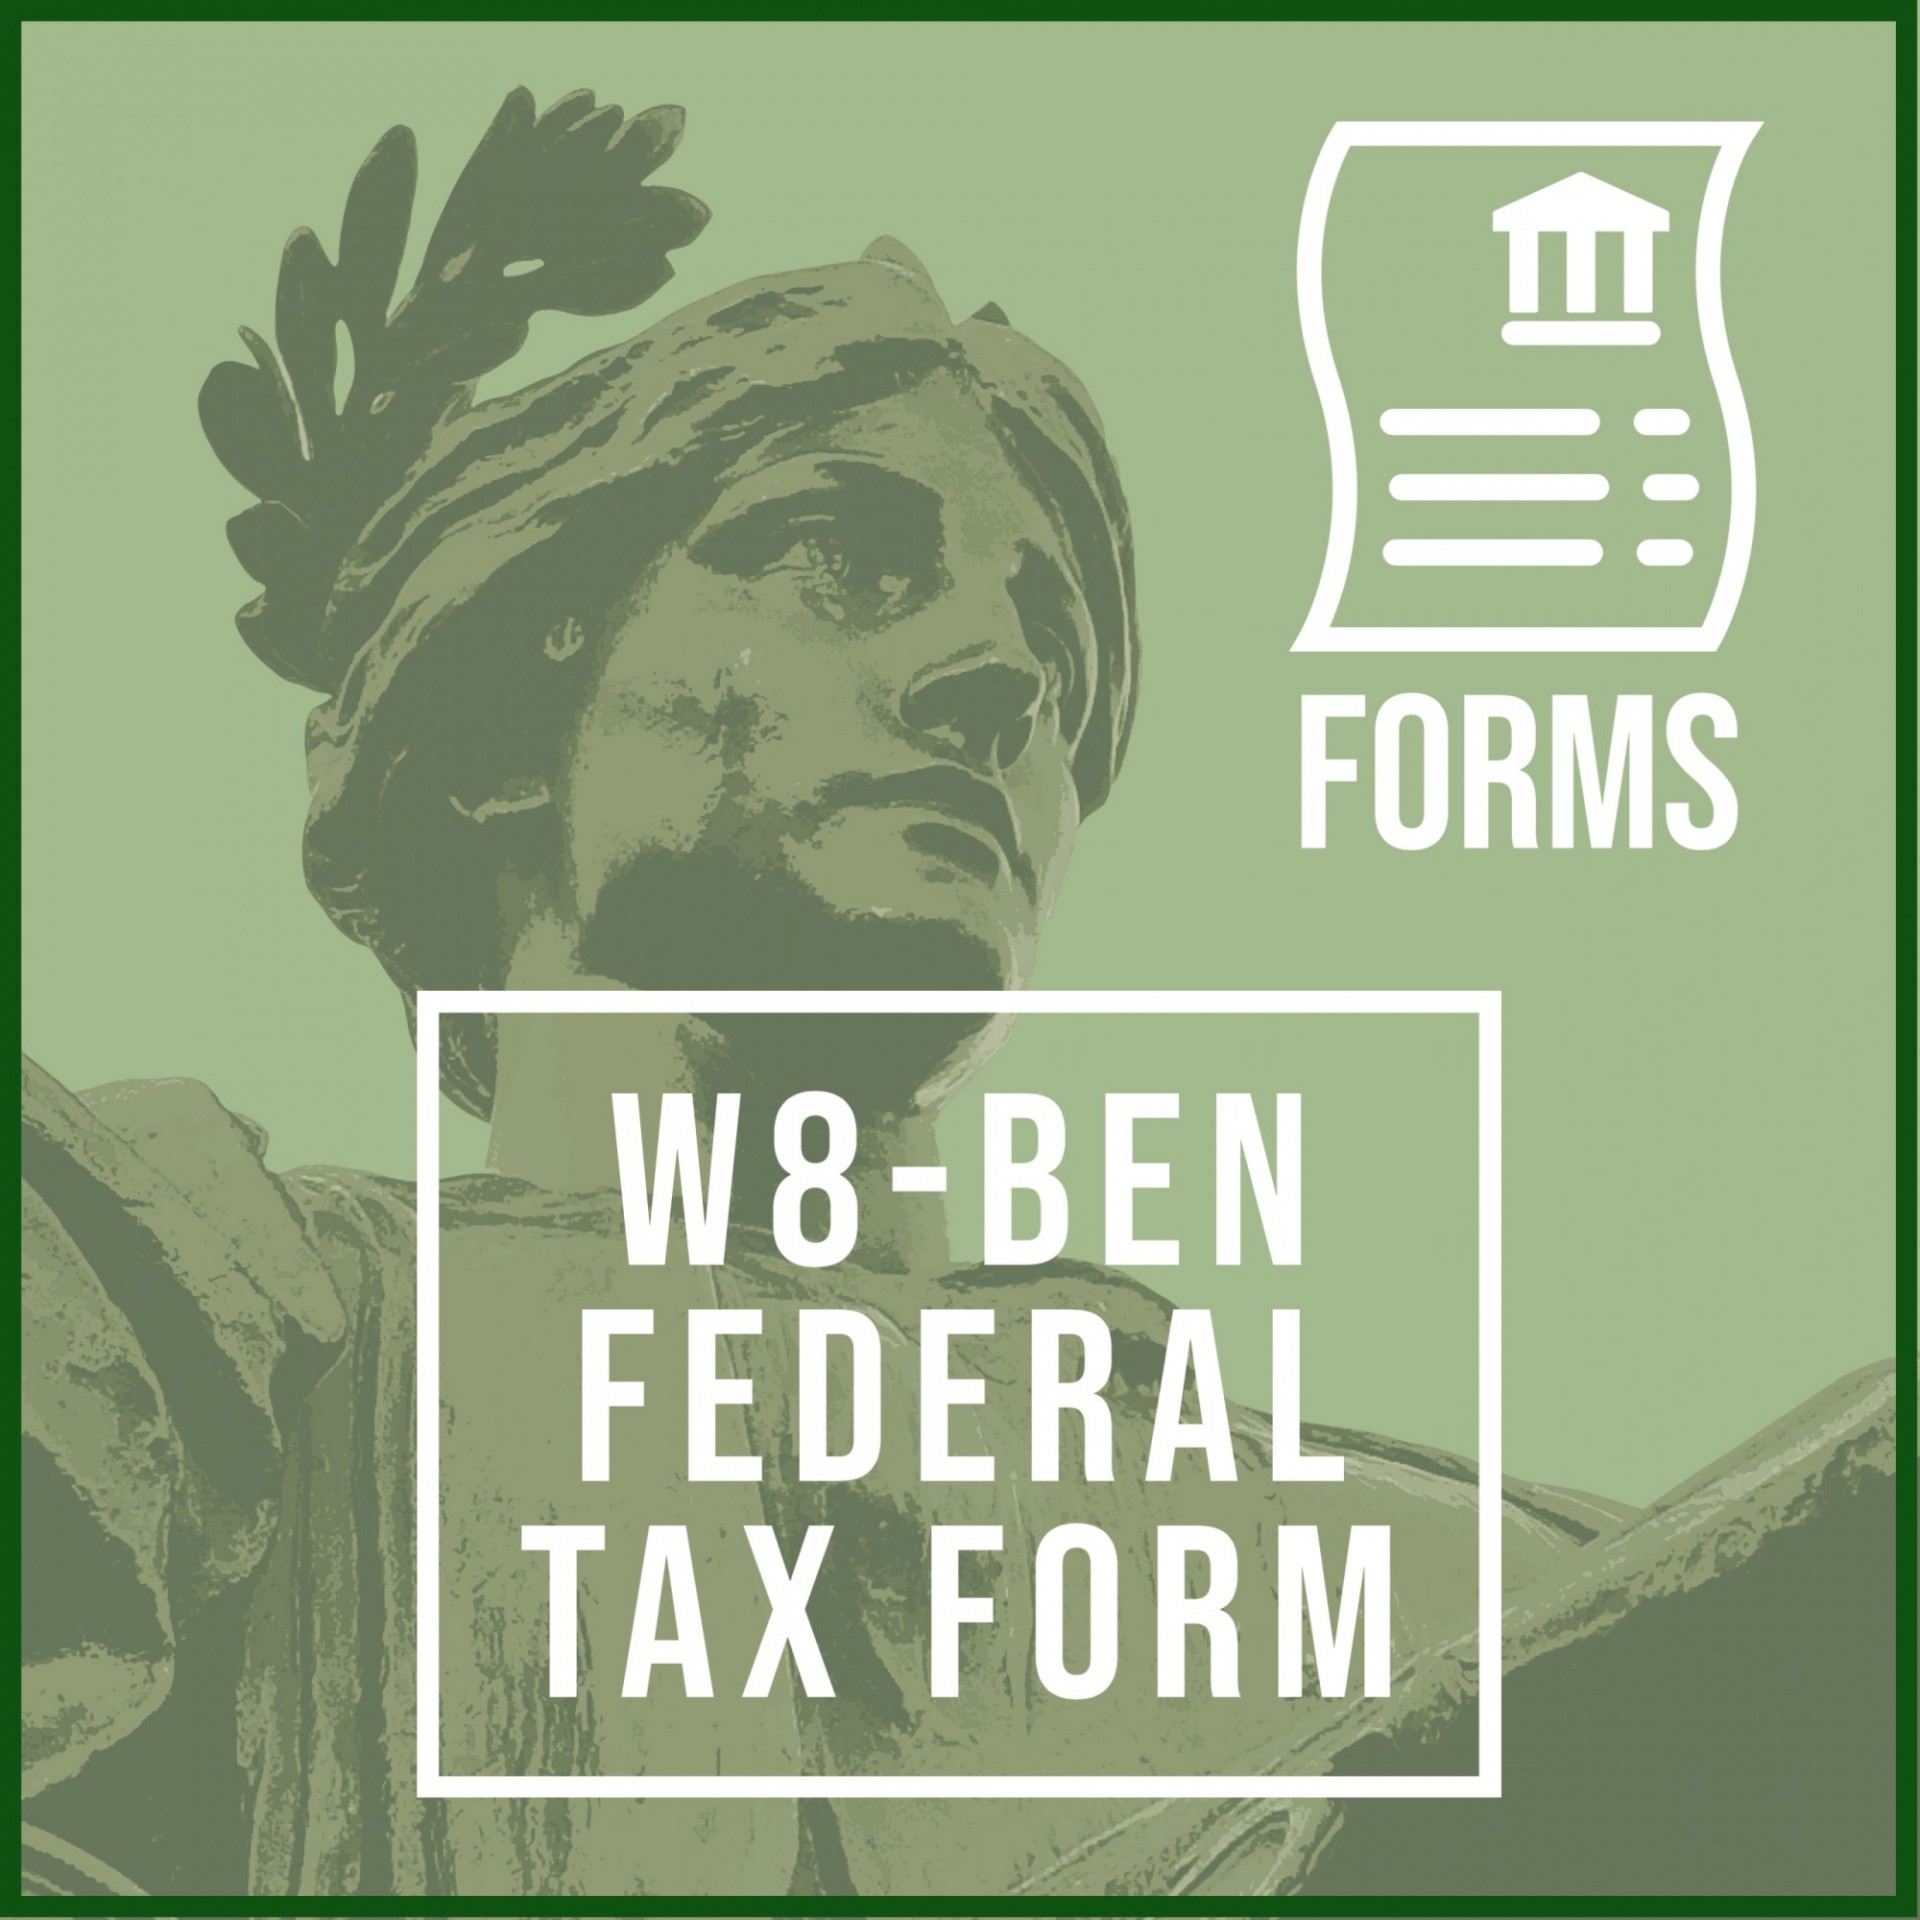 Forms Icon: W9-BEN Federal Tax Form